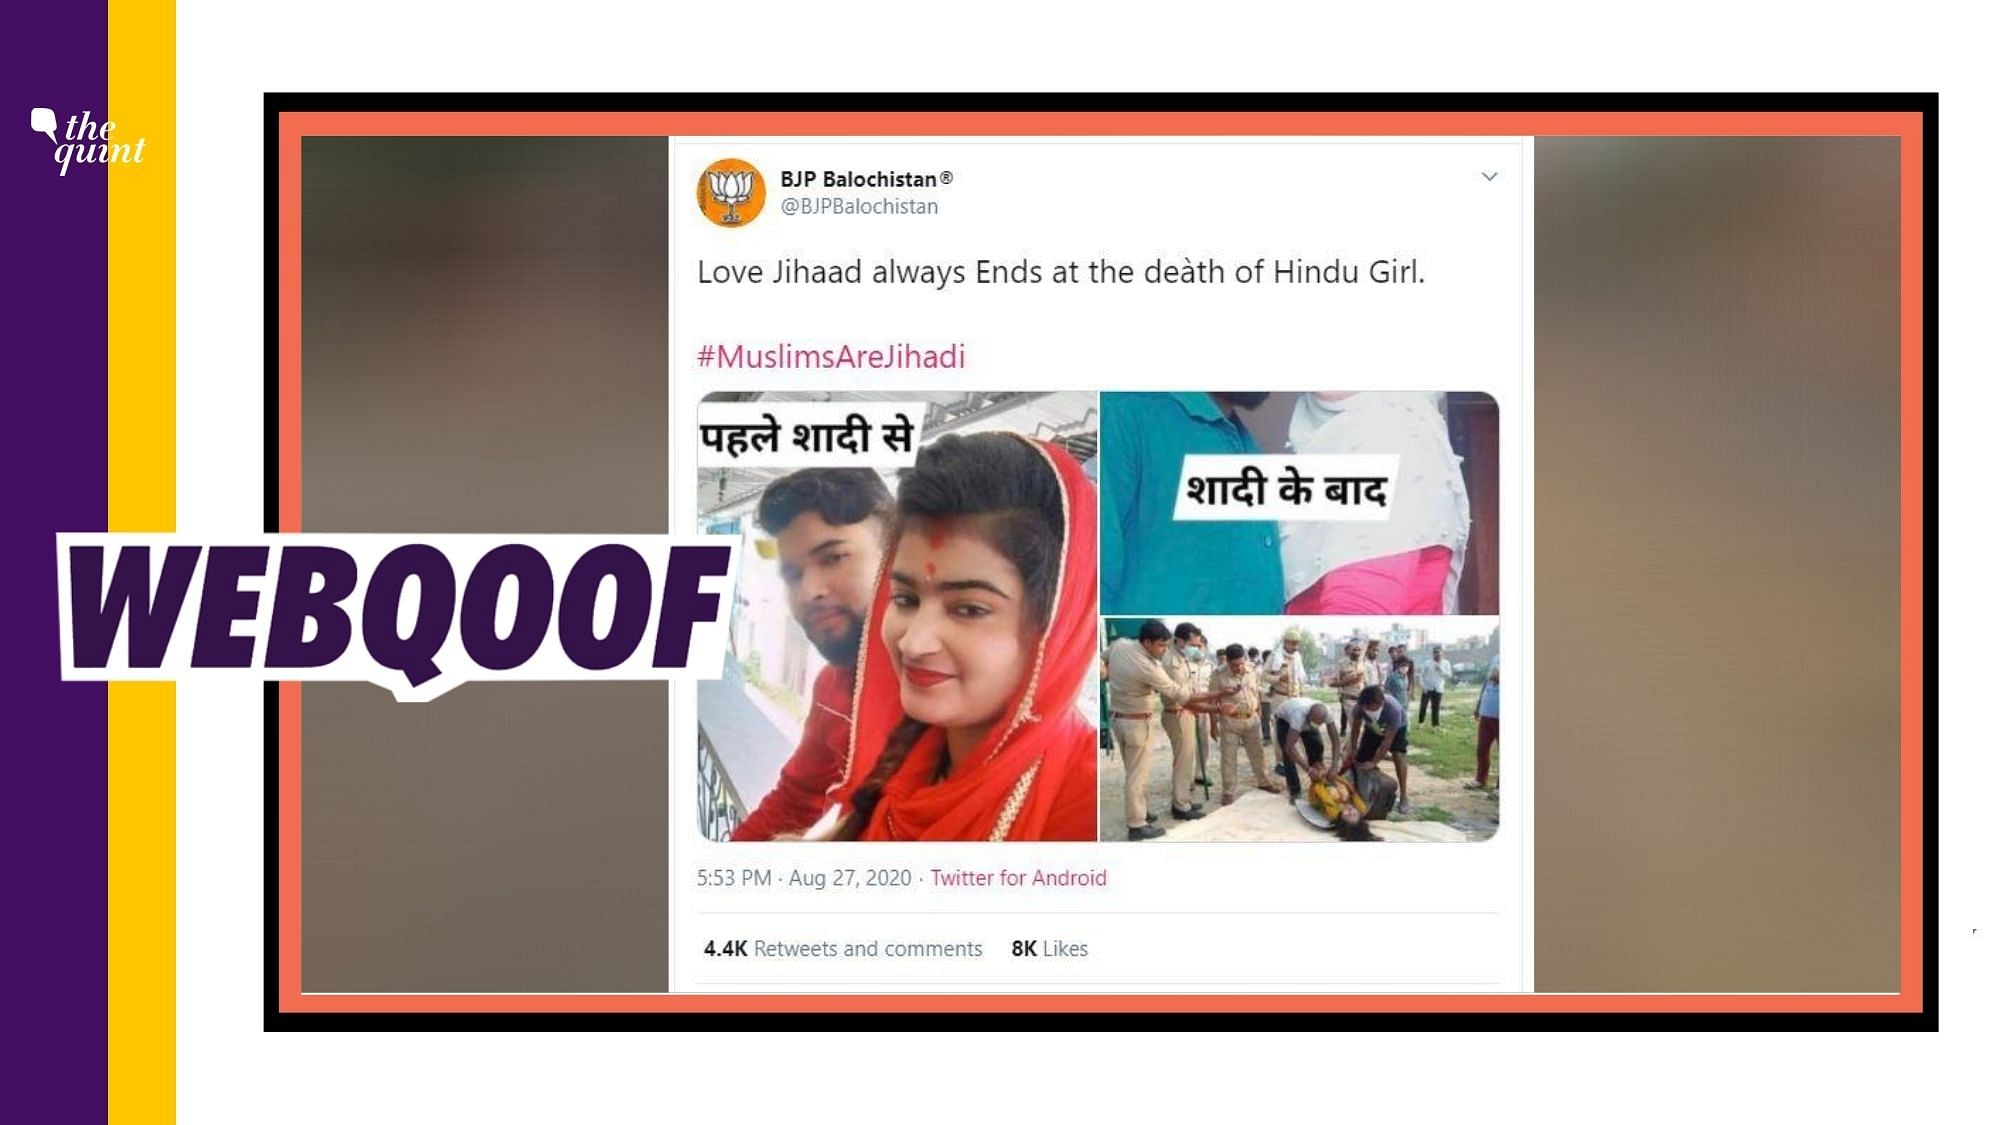 Unrelated images are being shared on social media with “Love Jihad” spin.